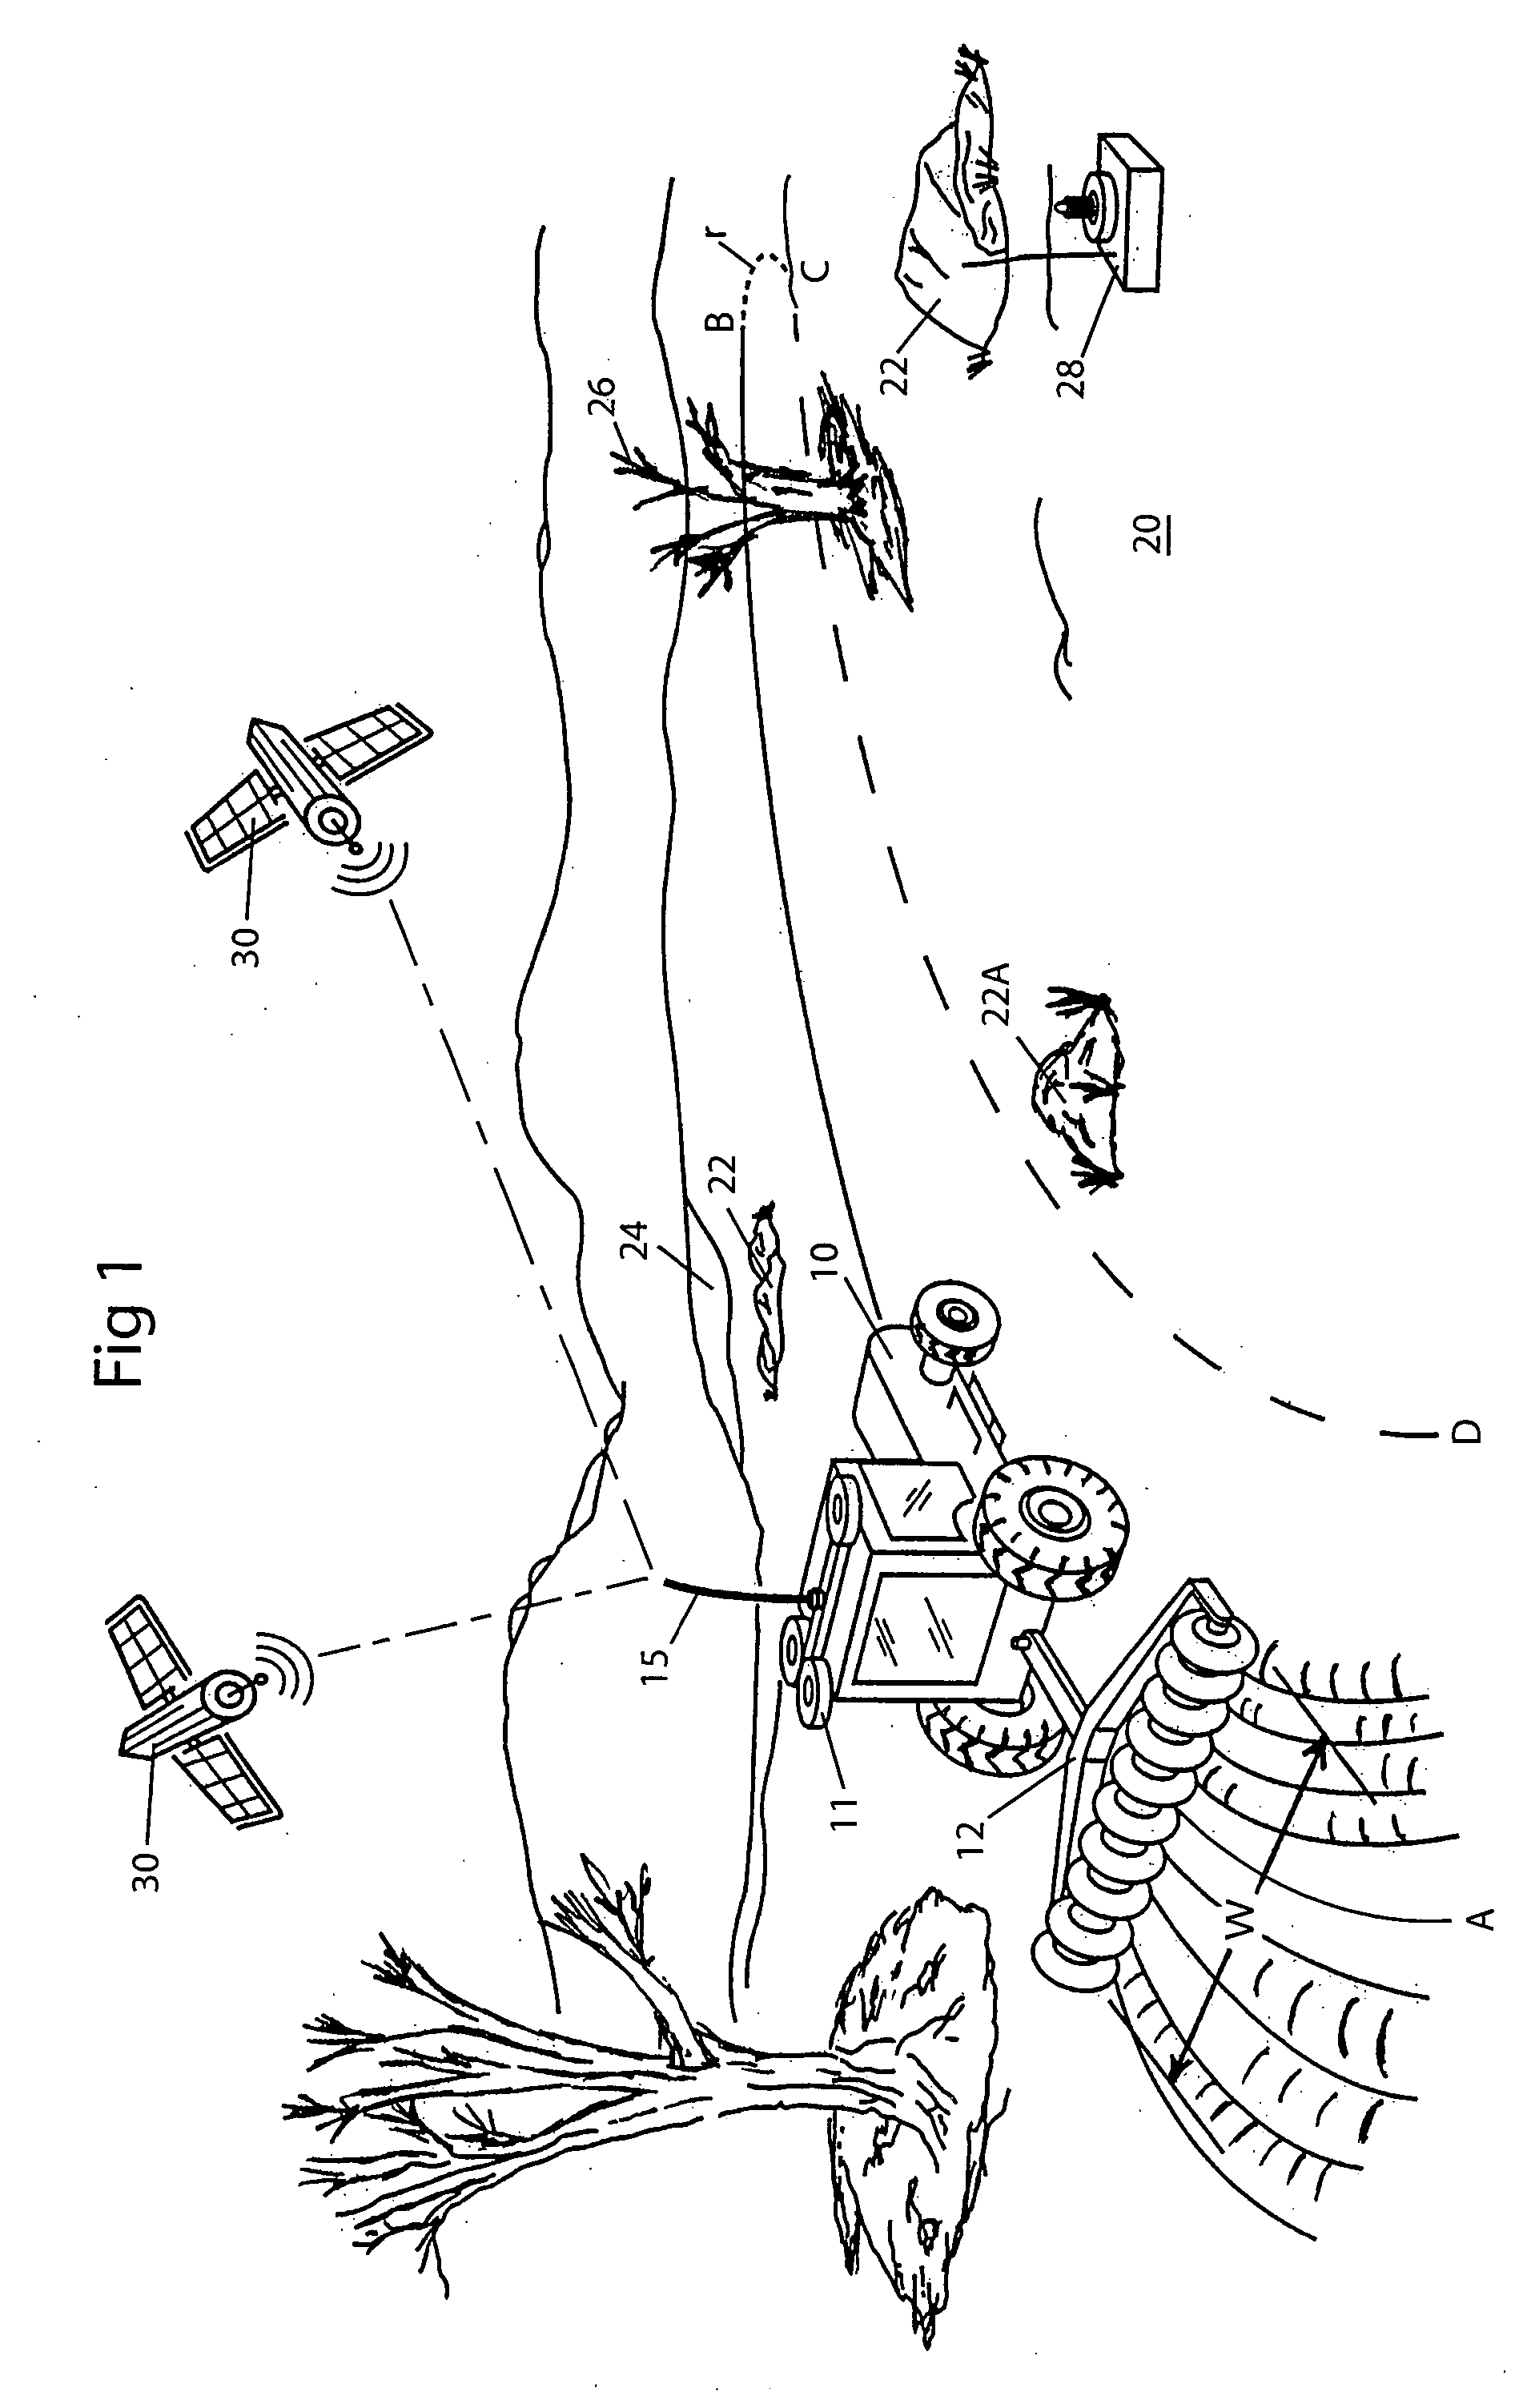 System and method for interactive selection of agricultural vehicle guide paths with varying curvature along their length